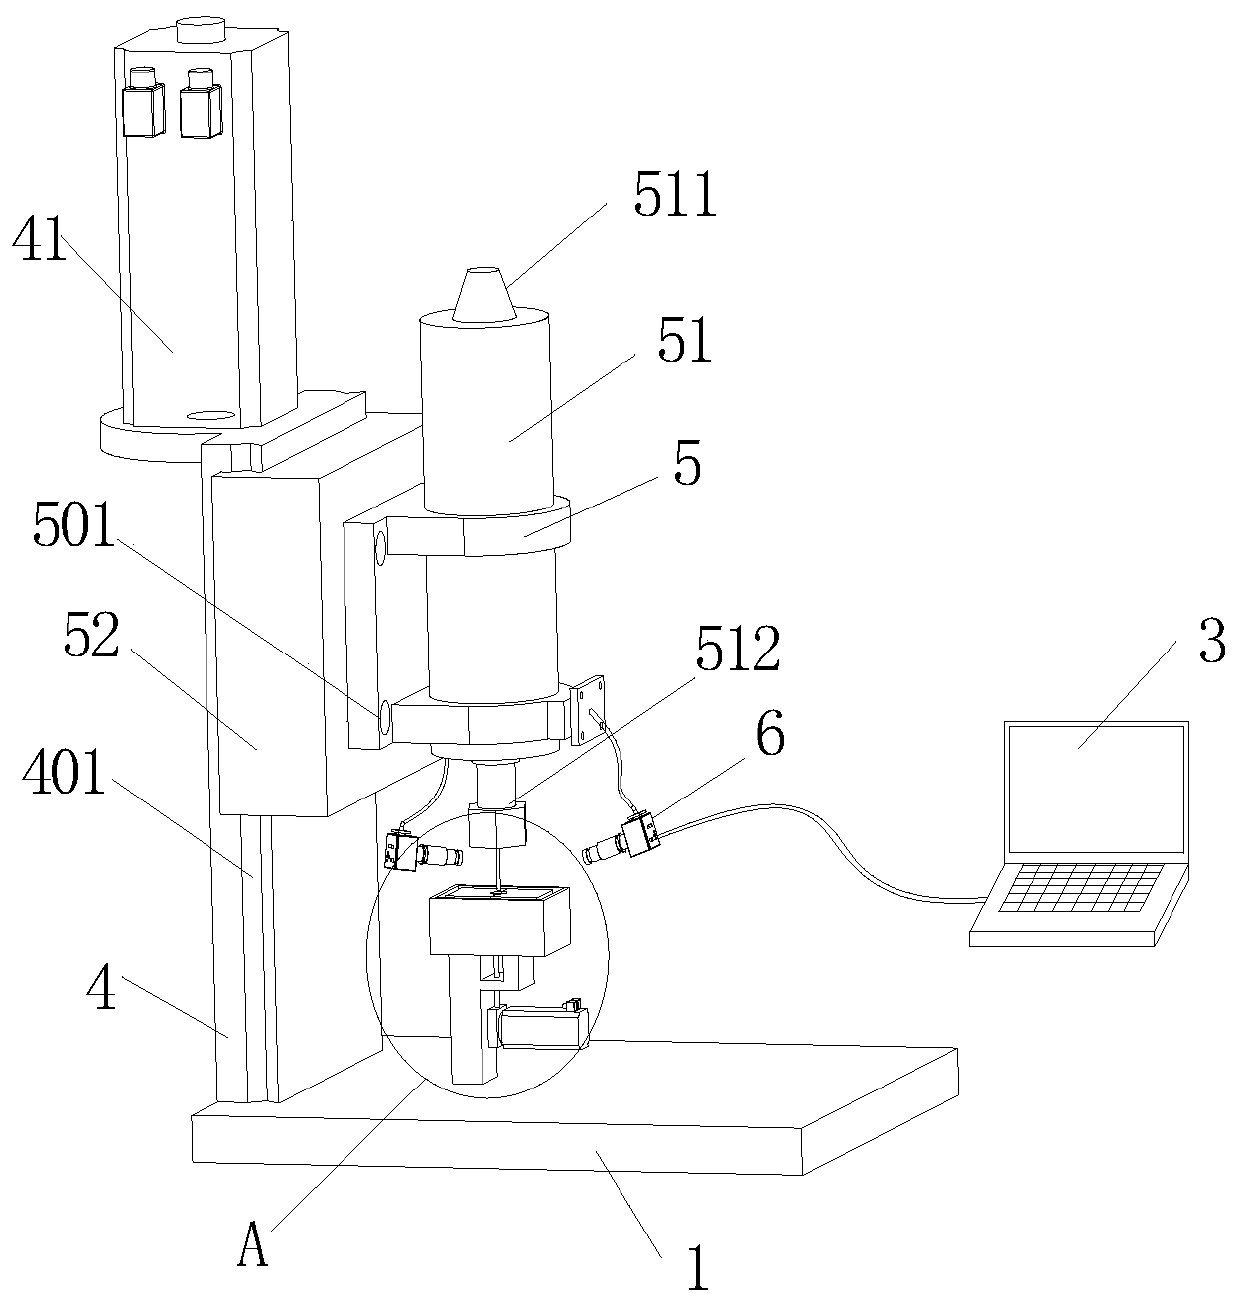 Combined machining testing device of spark electrolysis discharging, applied to semicircle orifice